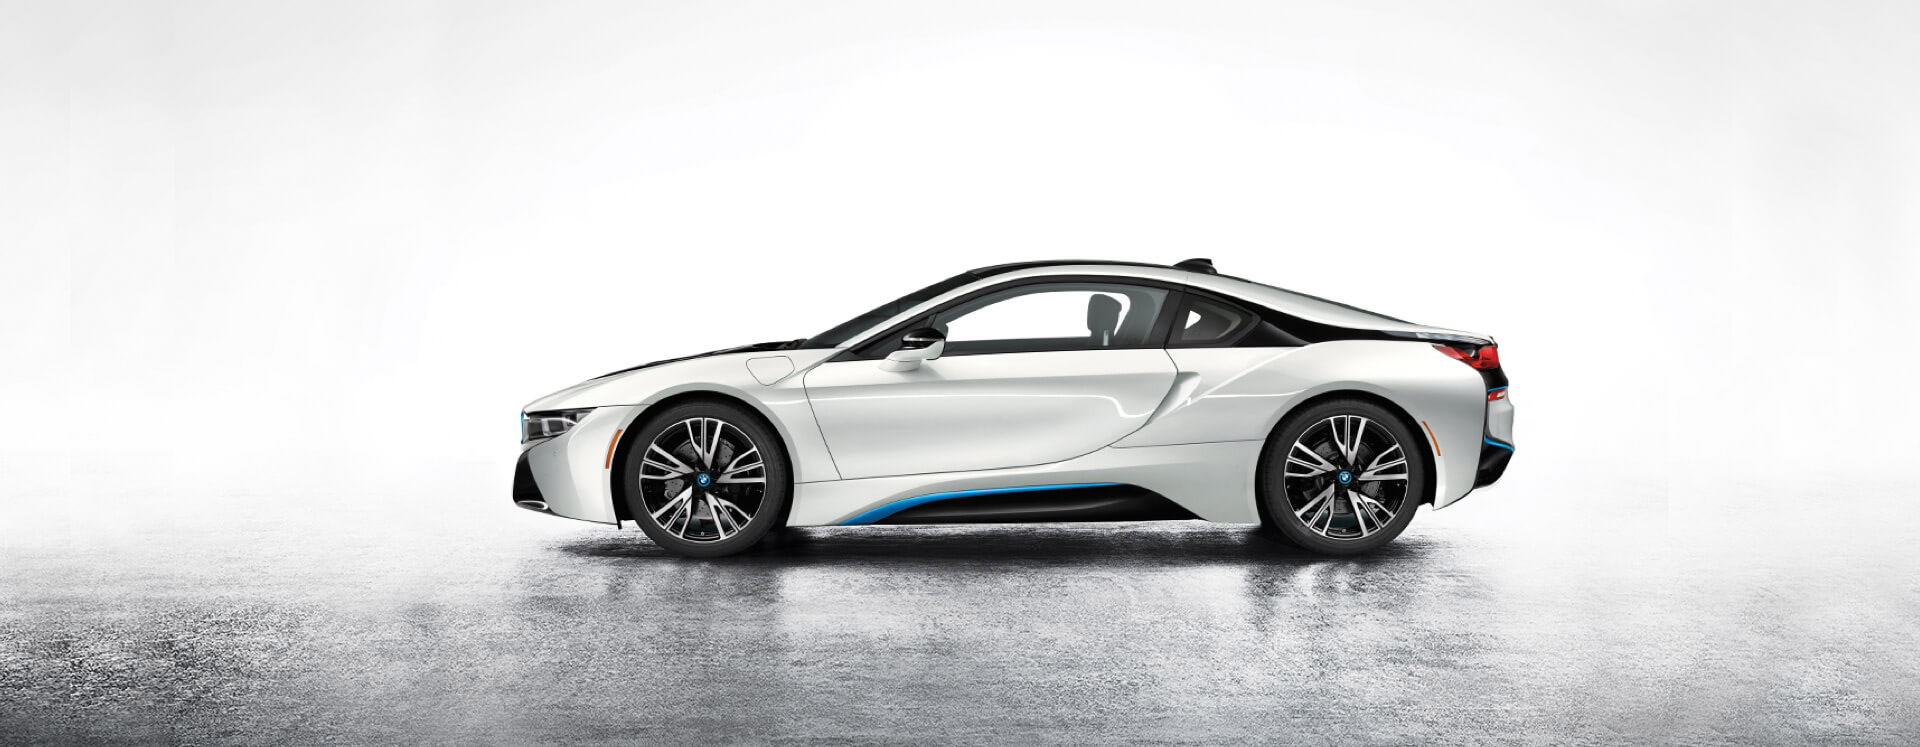 The Sexy and Innovative BMW i8 Leaves Envy Wherever It Drives